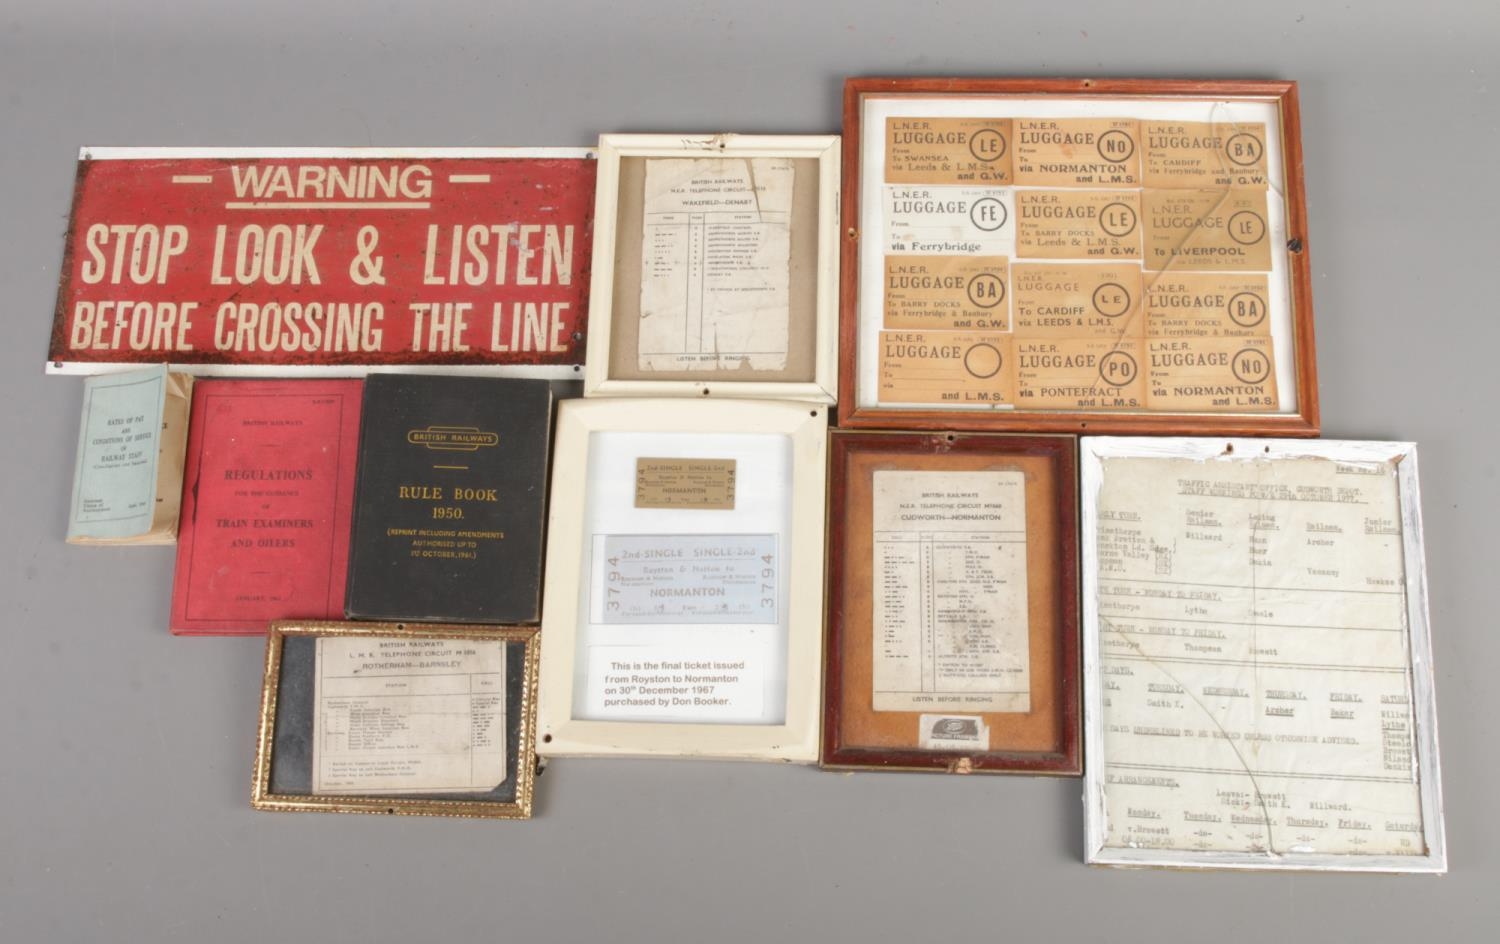 A collection of railway tickets, books, leaflets and signage, including luggage tickets and the last